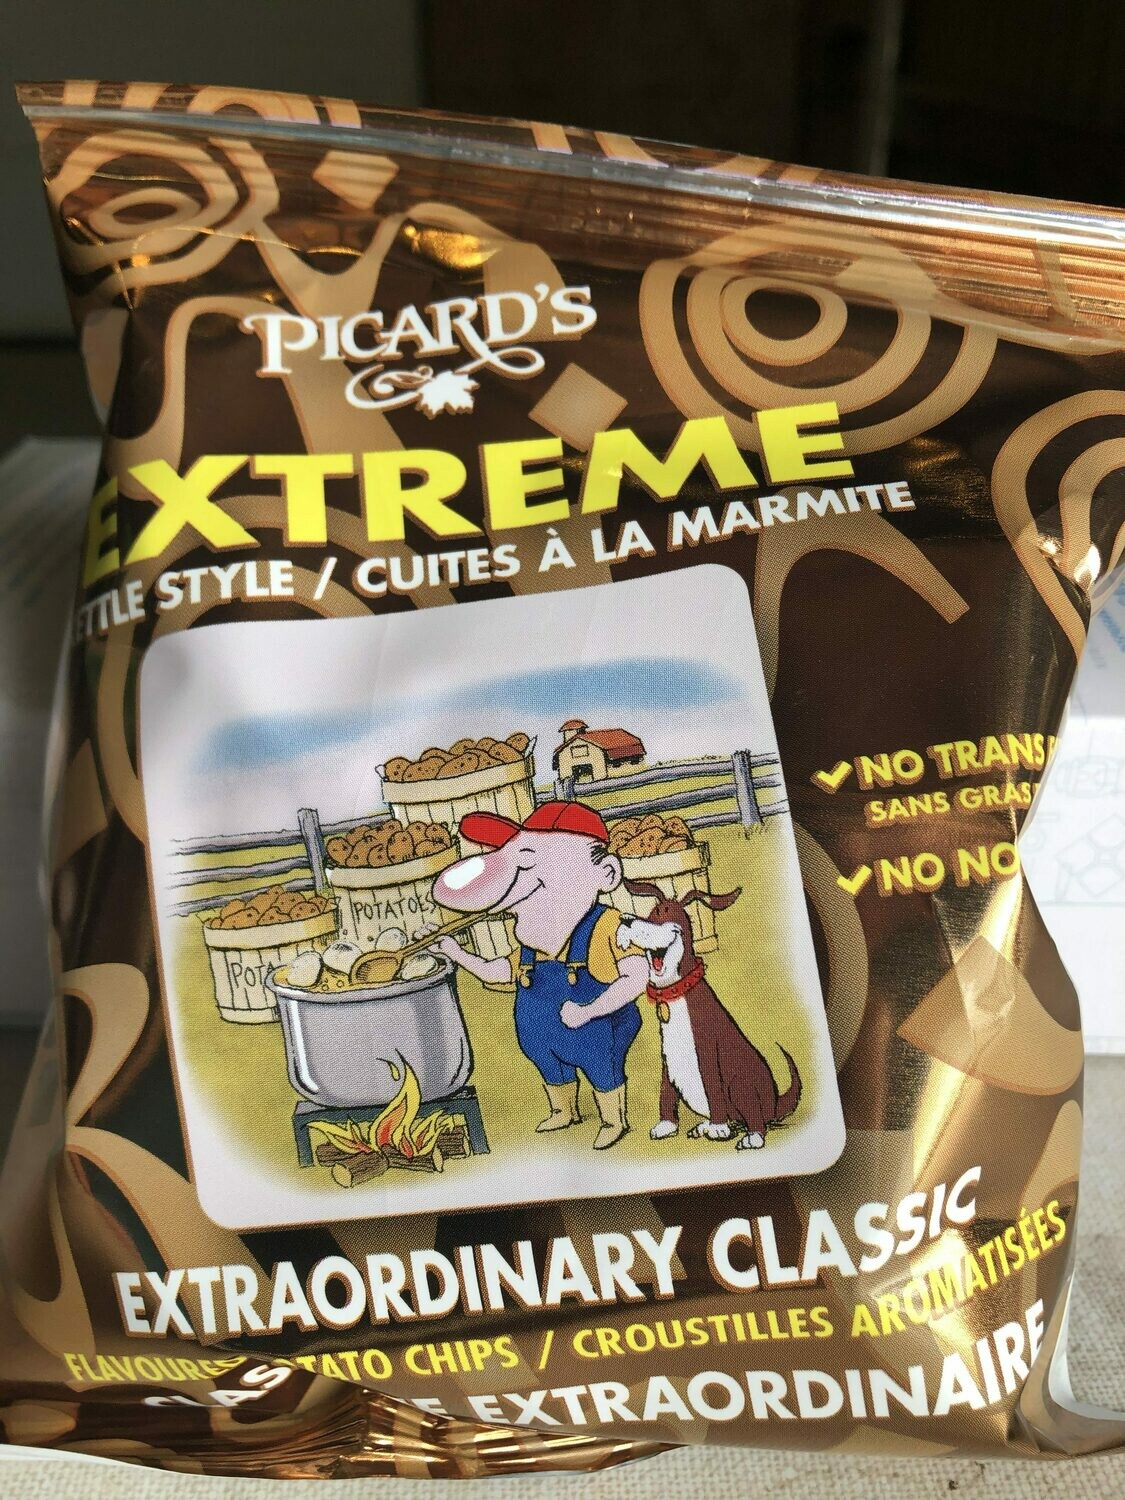 Picard Chips